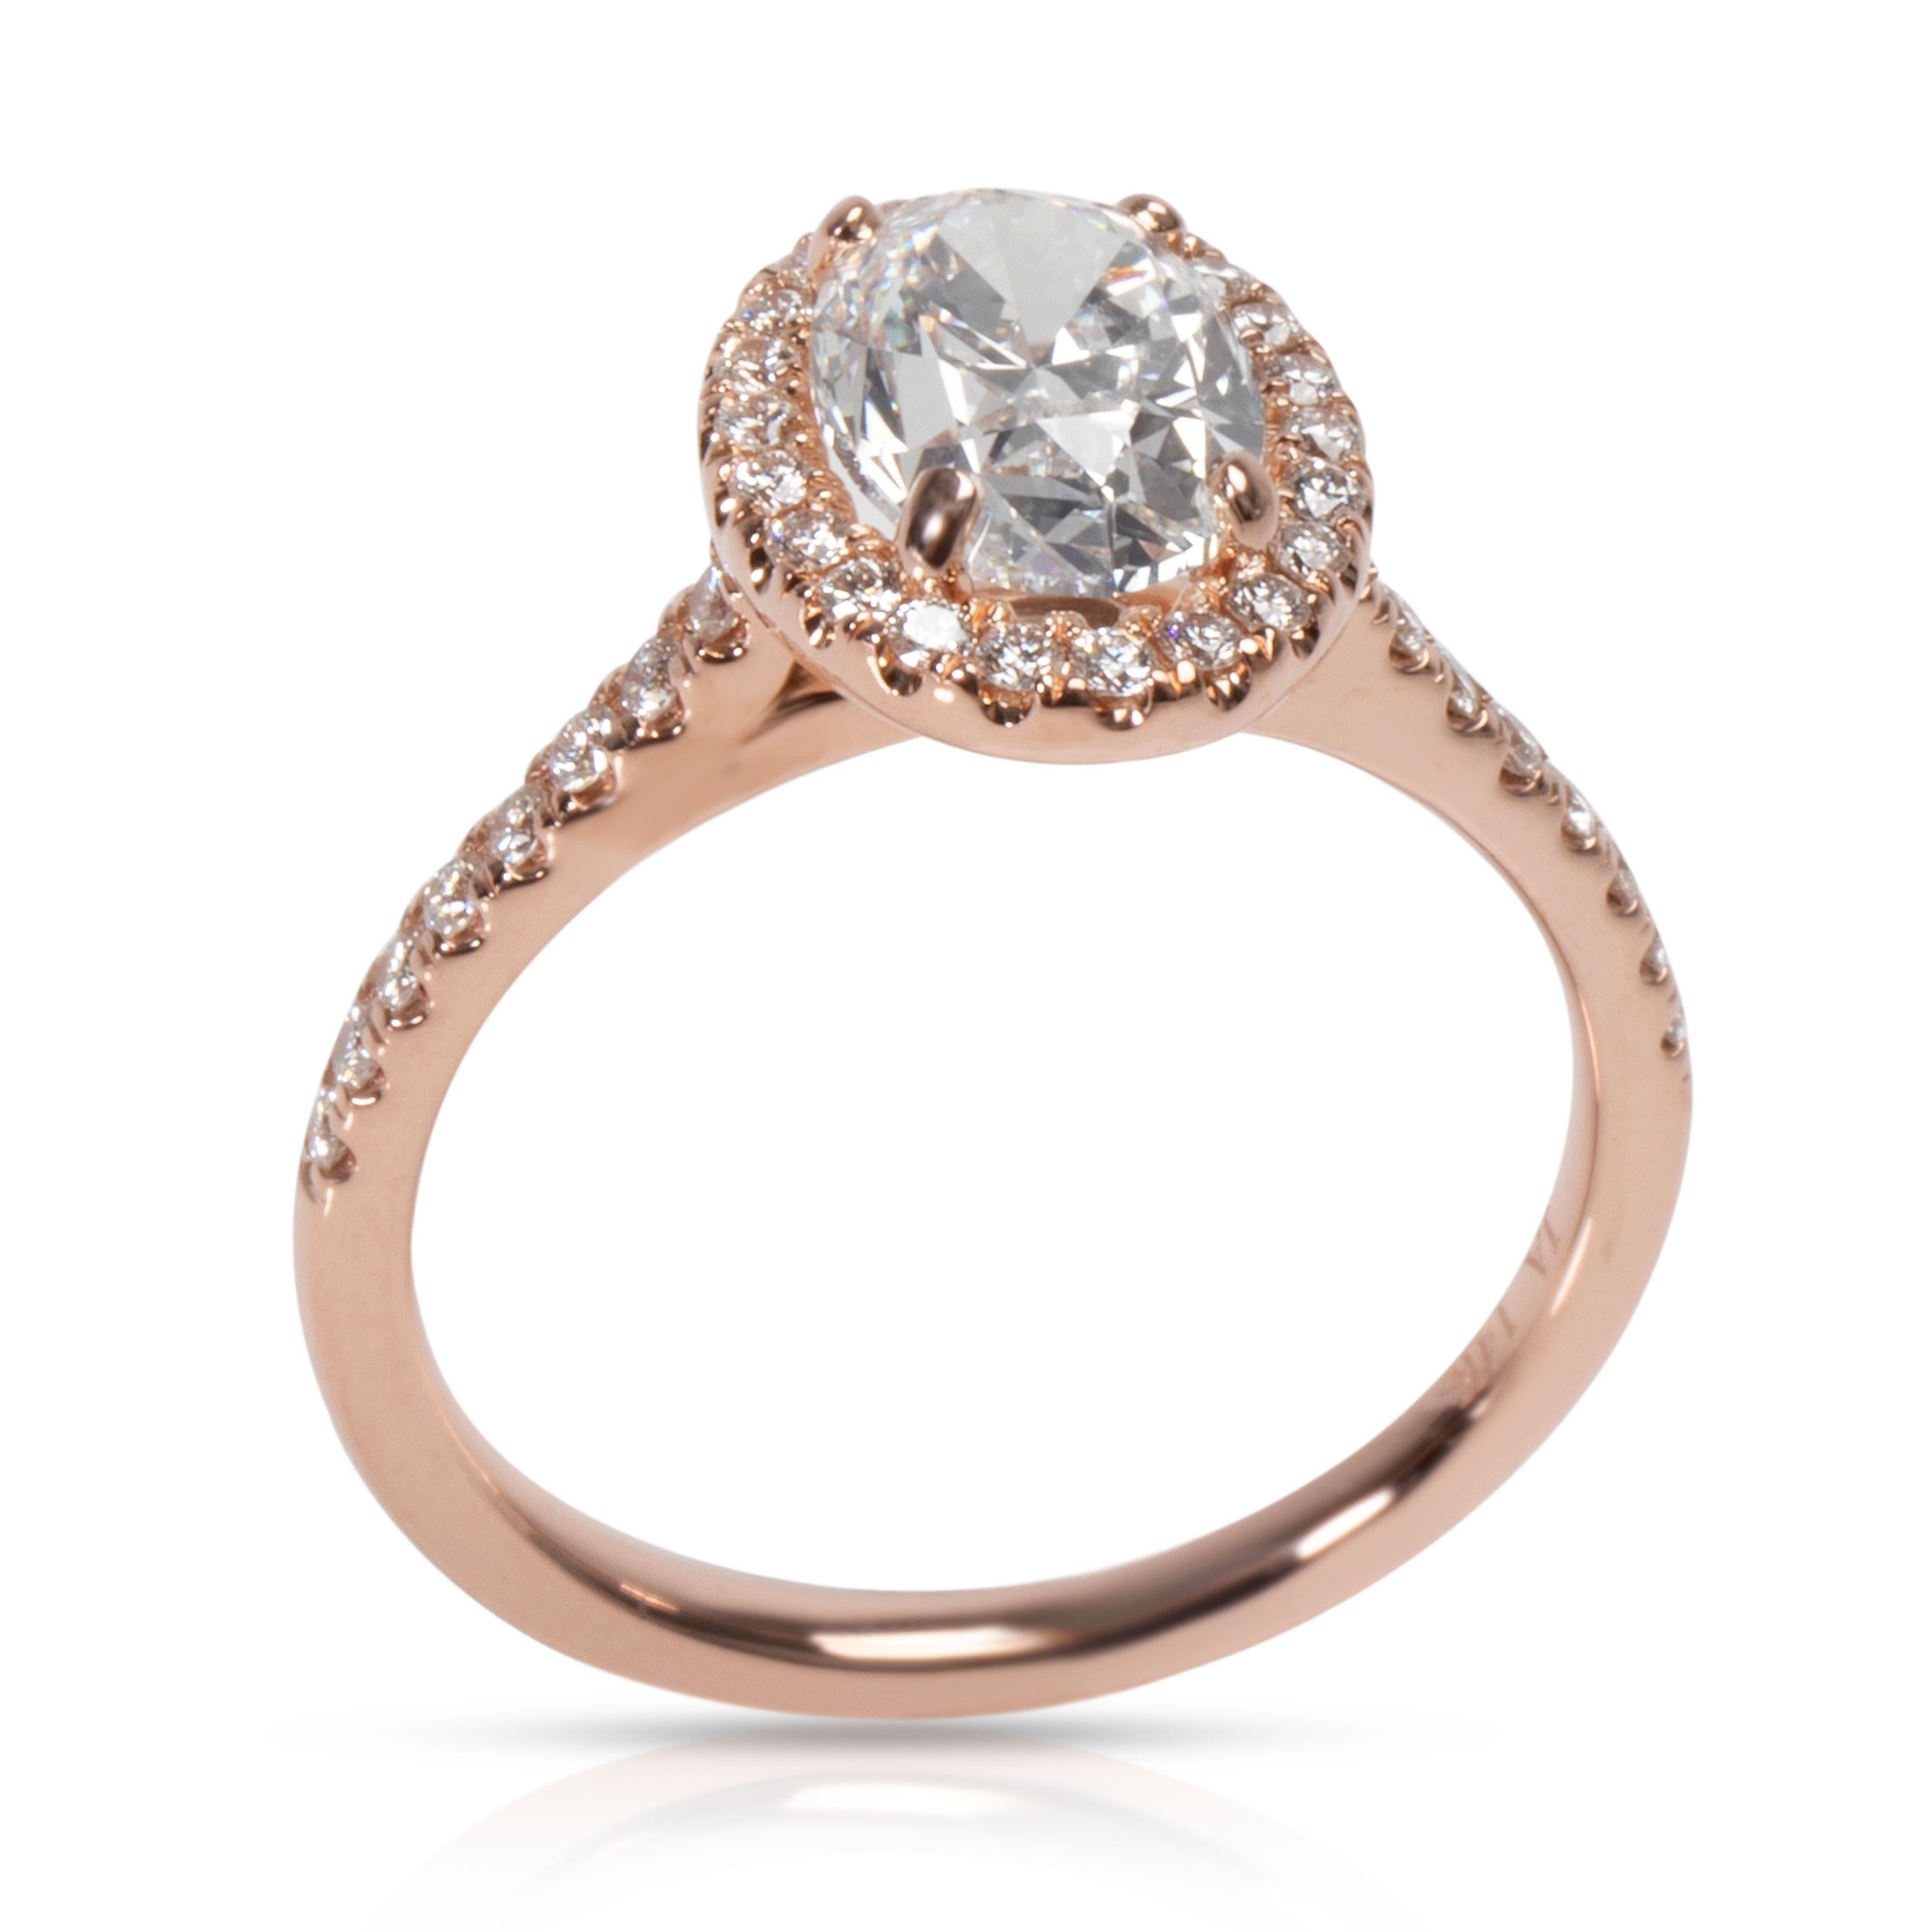 James Allen Oval Halo Diamond Engagement Ring in 14K Rose Gold GIA F SI1 1.6 CTW

PRIMARY DETAILS
SKU: 105718
Listing Title: James Allen Oval Halo Diamond Engagement Ring in 14K Rose Gold GIA F SI1 1.6 CTW
Condition Description: Retails for 6,000